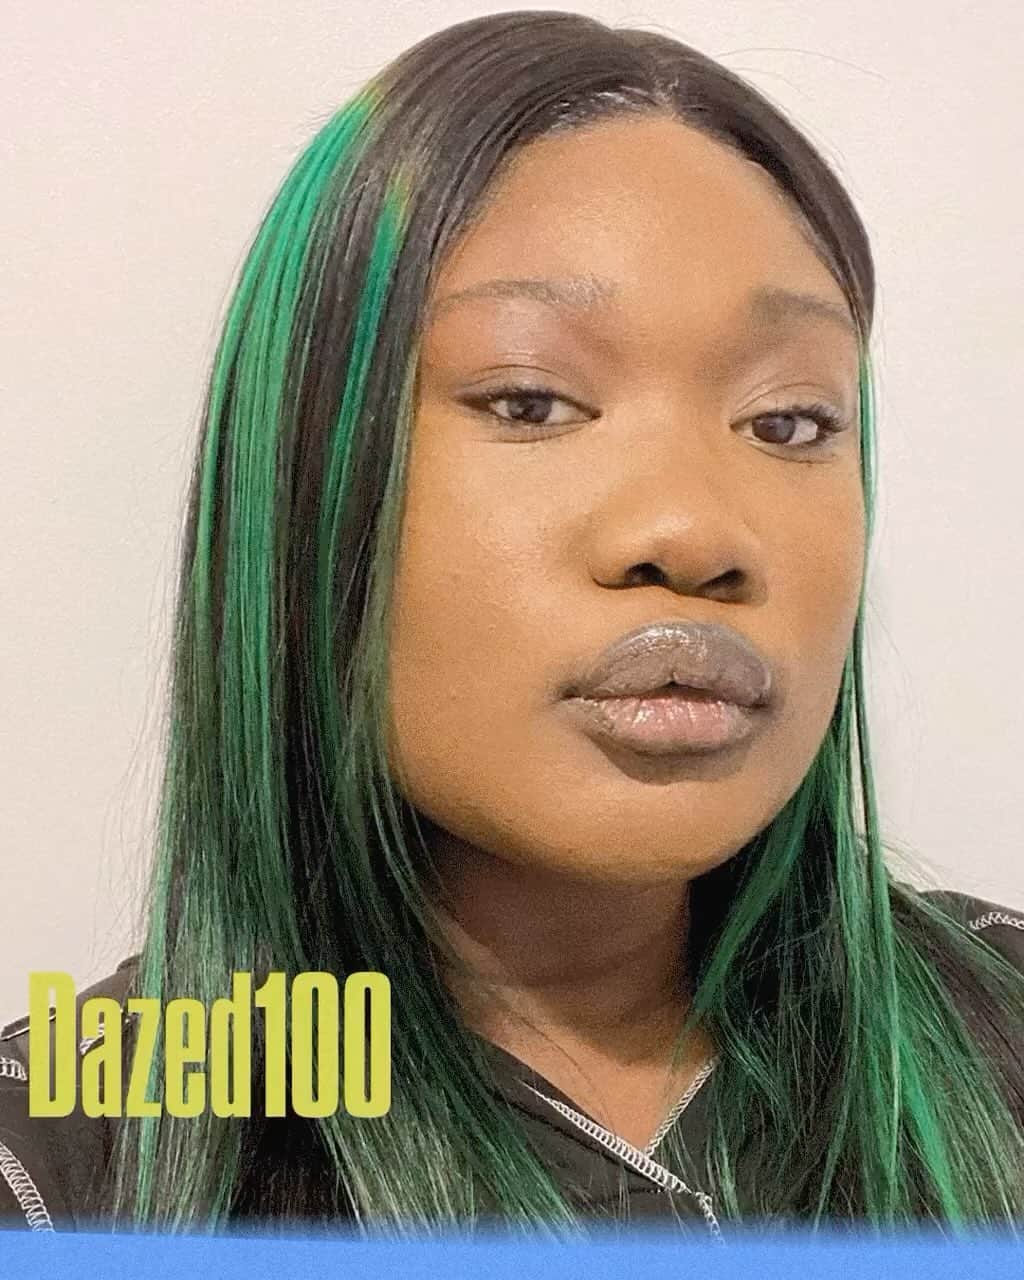 Dazed Magazineのインスタグラム：「Our 2023 edition of the #Dazed100 features an esteemed selection of next gen of music talent from all over the world, including @bam_bii @dexterinthenewsagent @skaiwater @tyla @superjazzclub @stellaexplorer @ceechynaa @scenesoflen @akataahliah @noguidnce @crystallmess and more! ⁠ ⁠ Find the full Dazed 100 list at  the link in our bio 🔗」